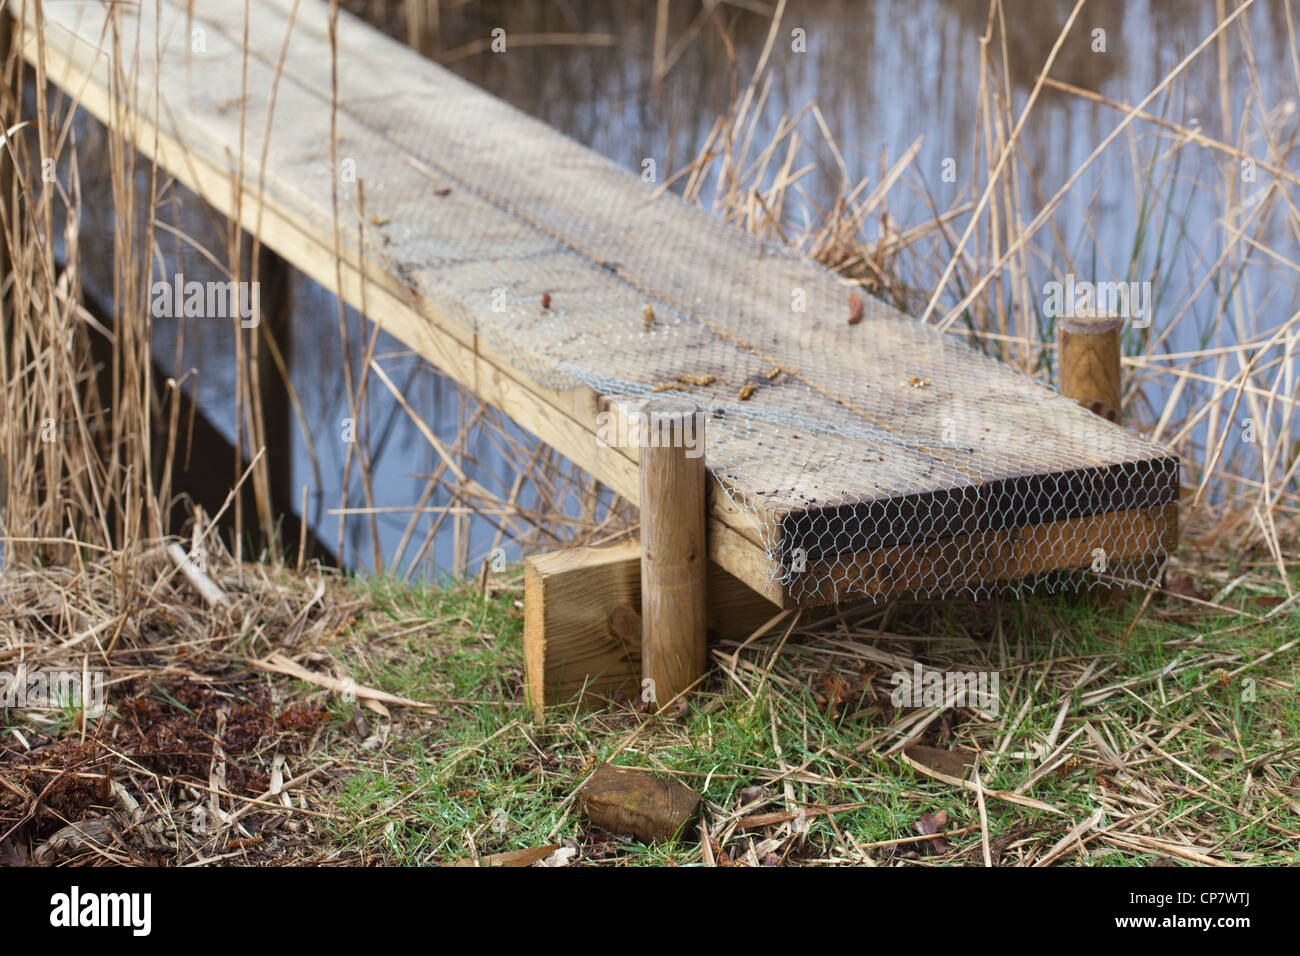 Construction of a simple plank bridge allowing access across a water filled ditch or dyke. Plank covered in wire netting Stock Photo